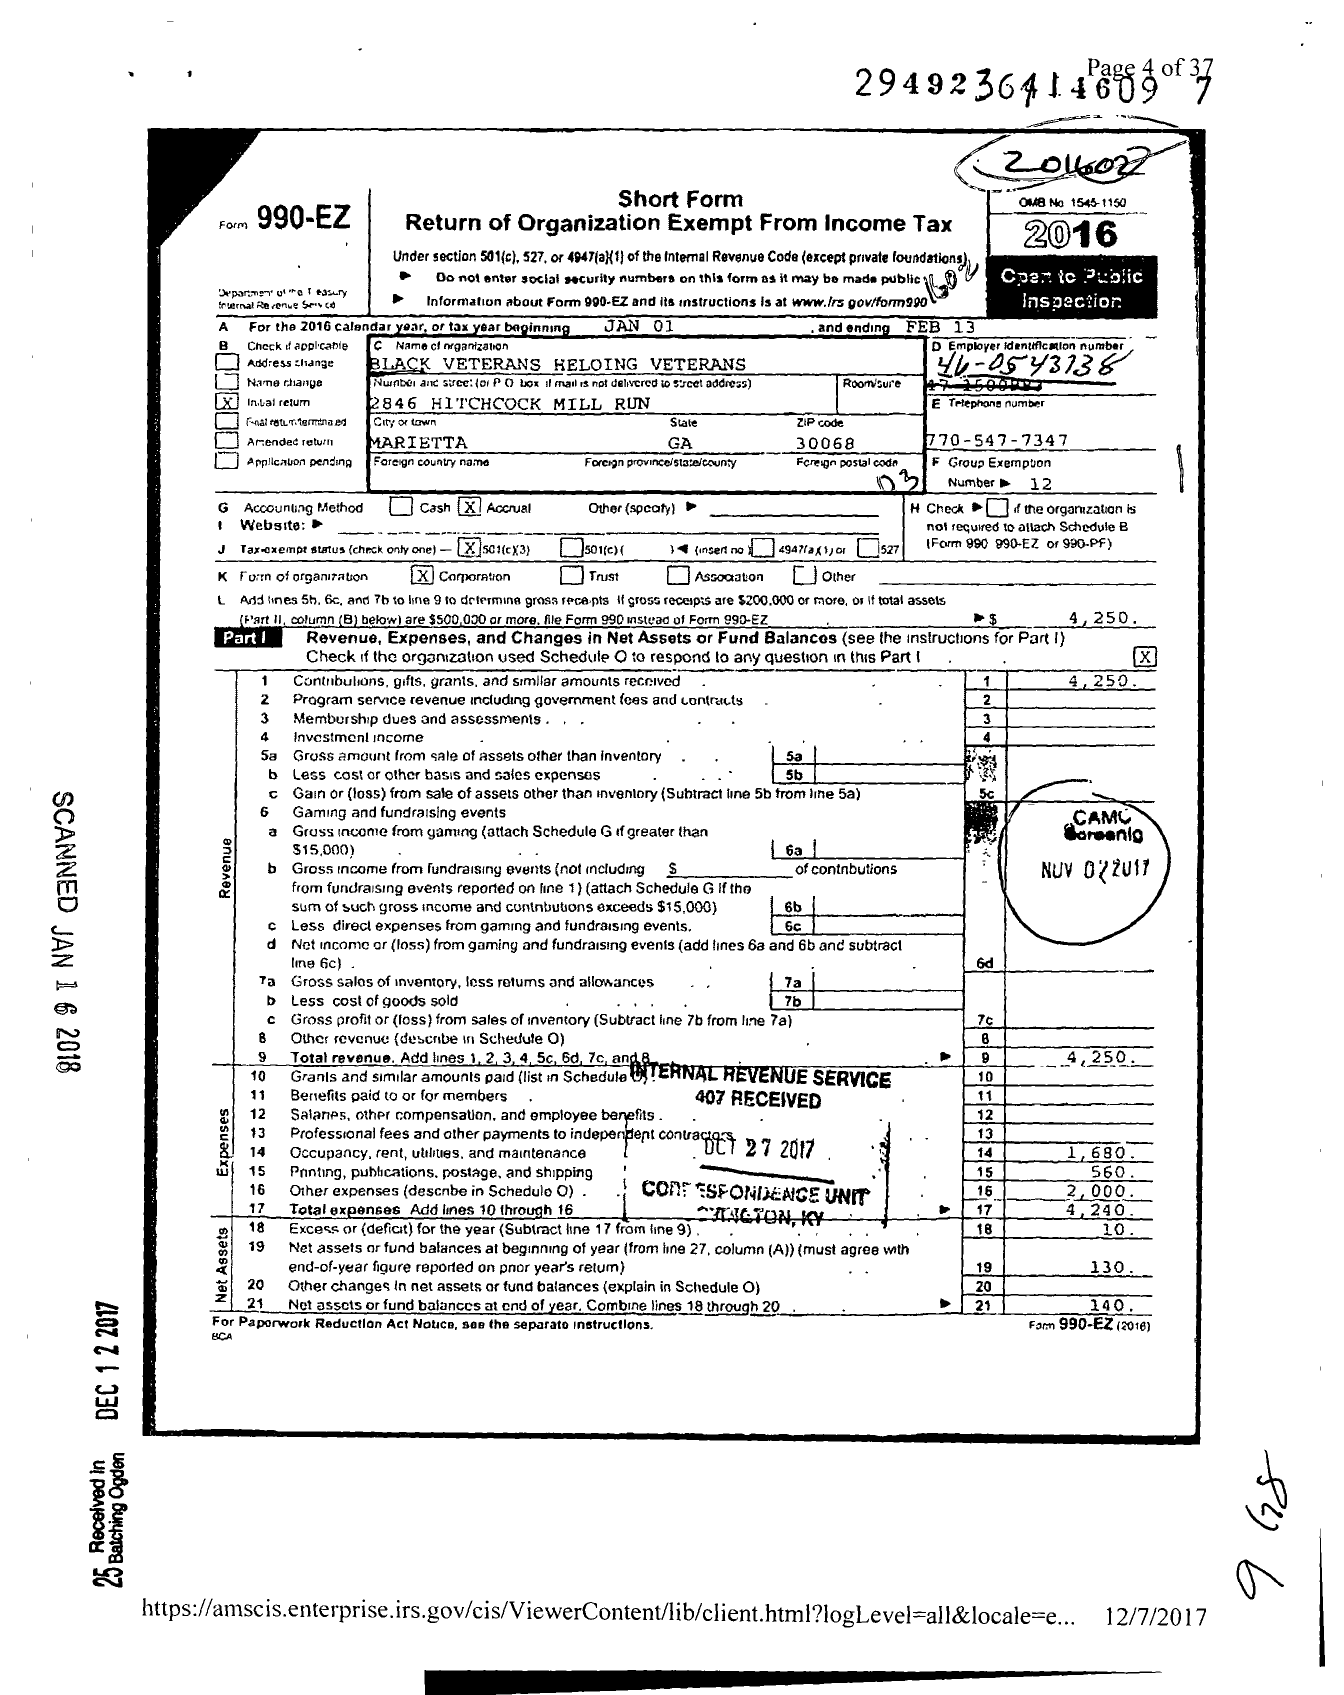 Image of first page of 2015 Form 990EZ for Black Veterans Heloing Veterans